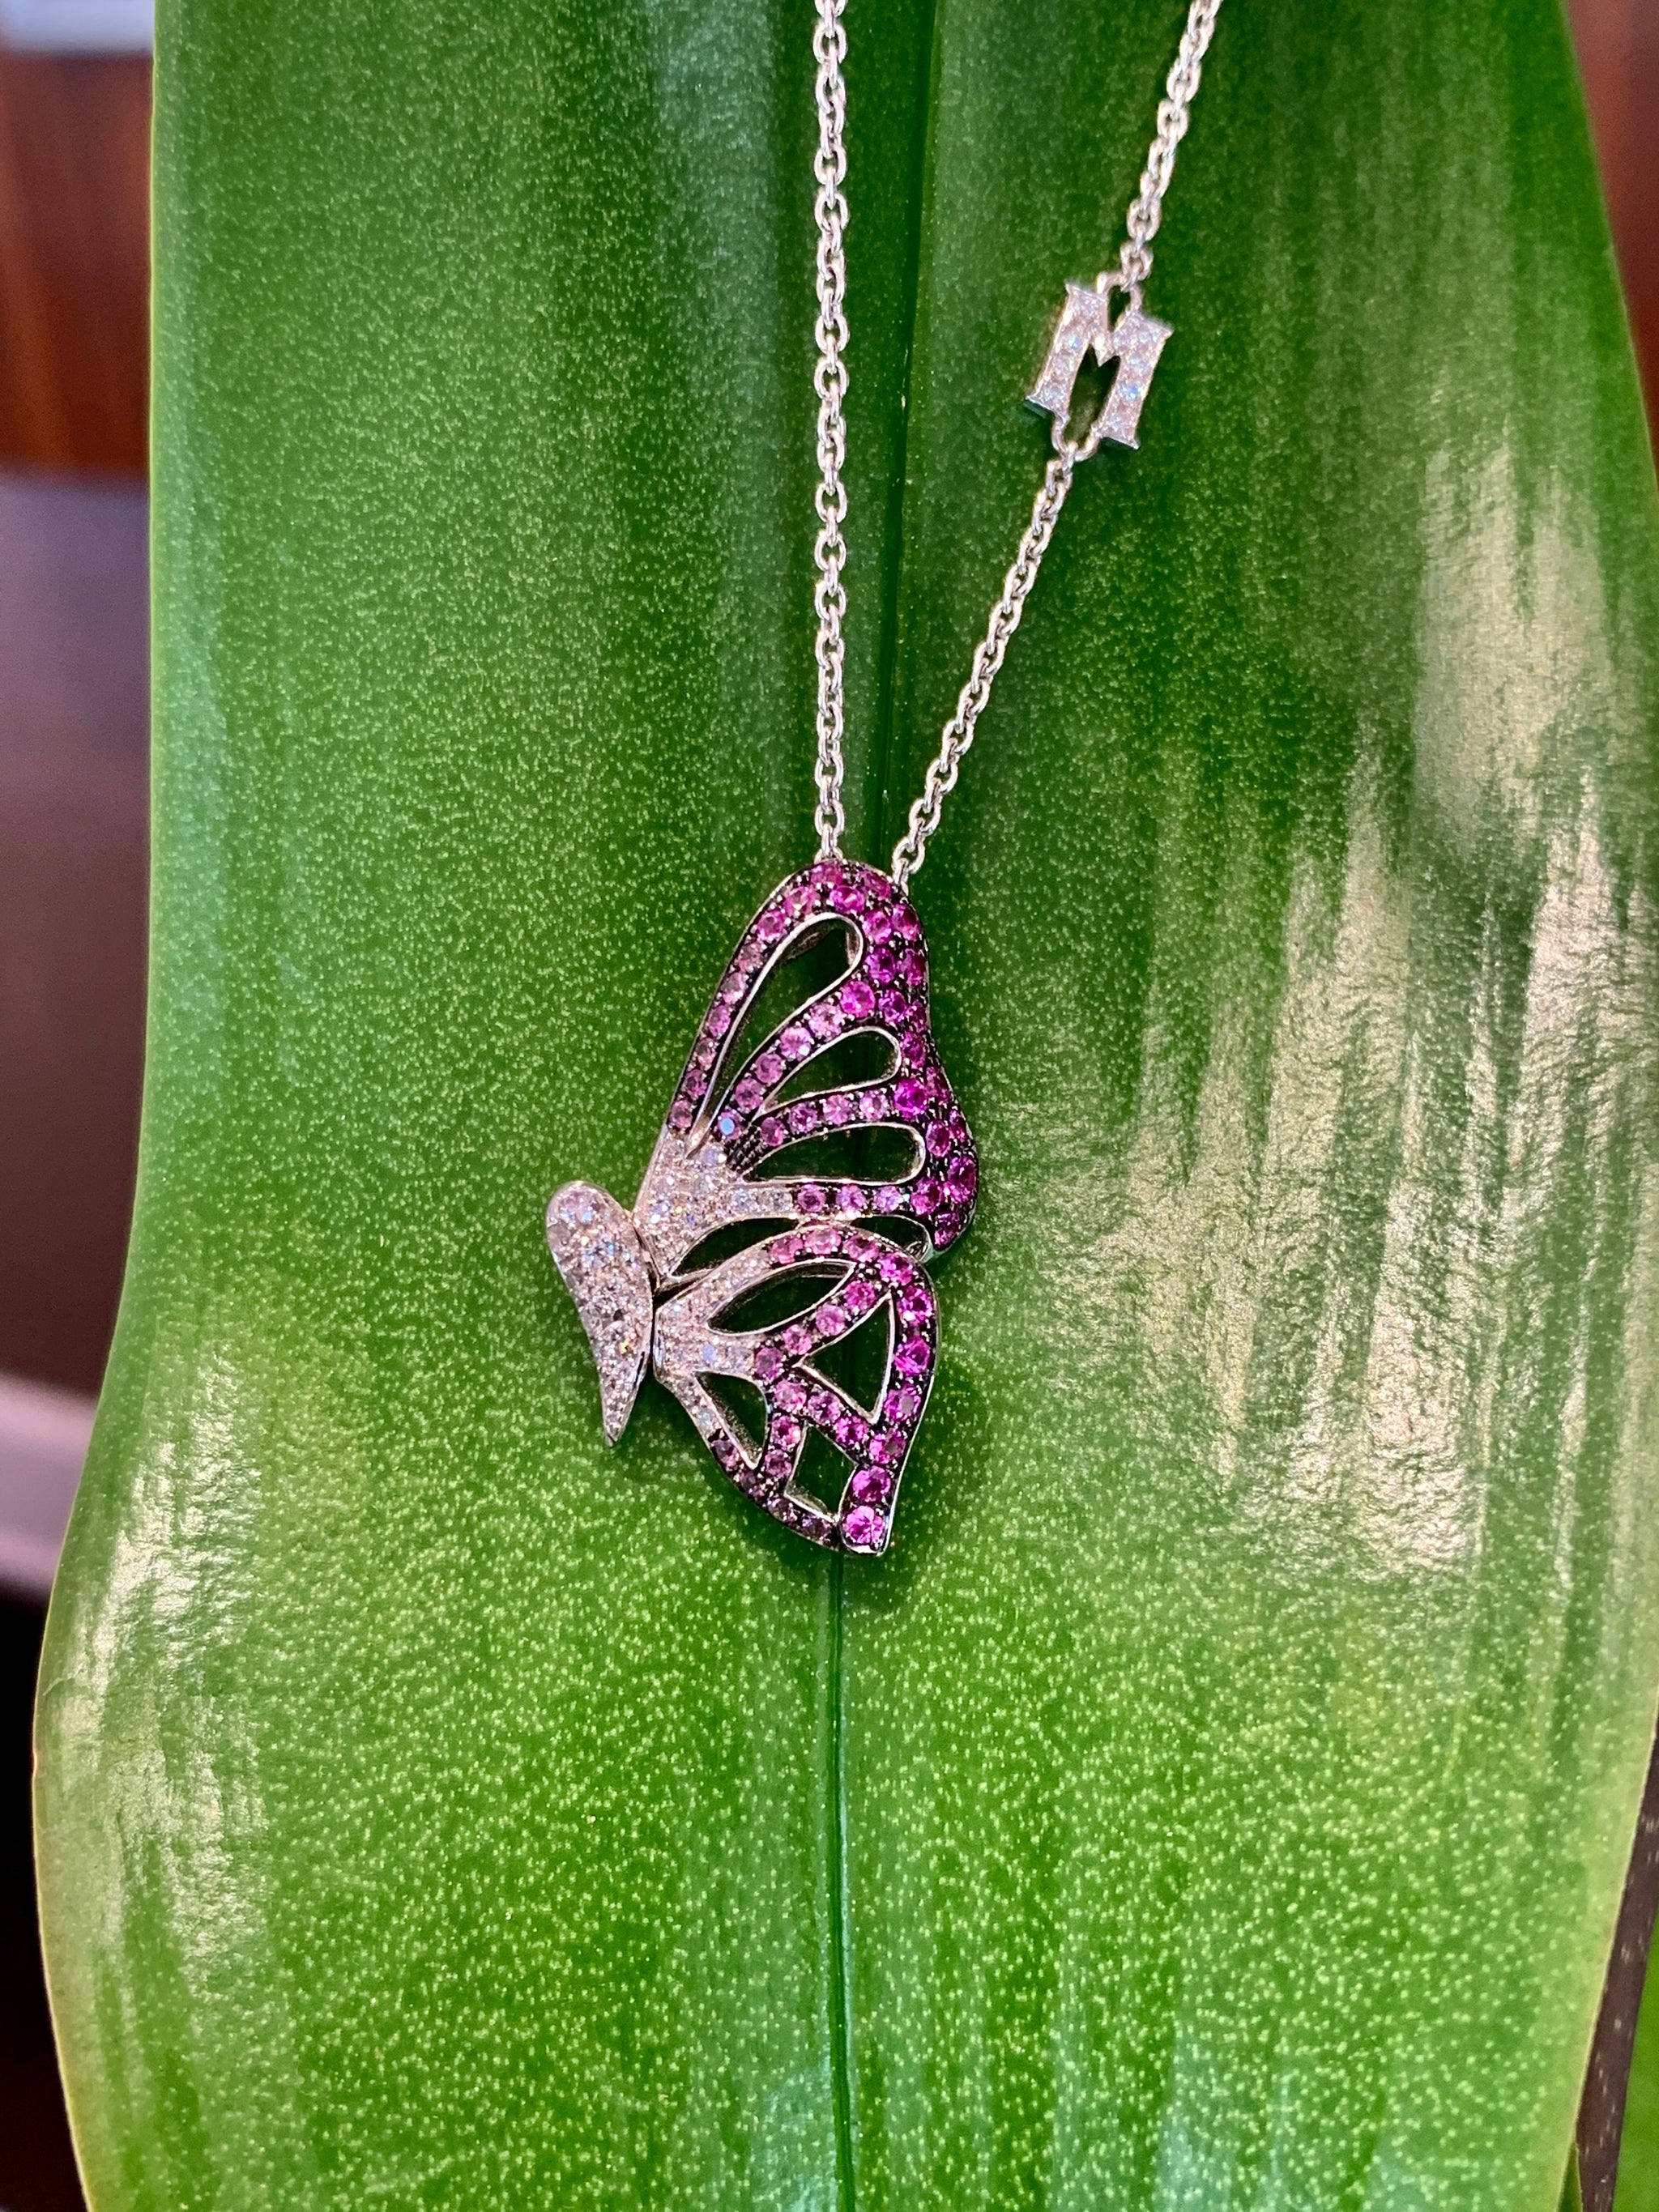 Louis Vuitton High Fashion Pink Sapphire And Diamond Necklace